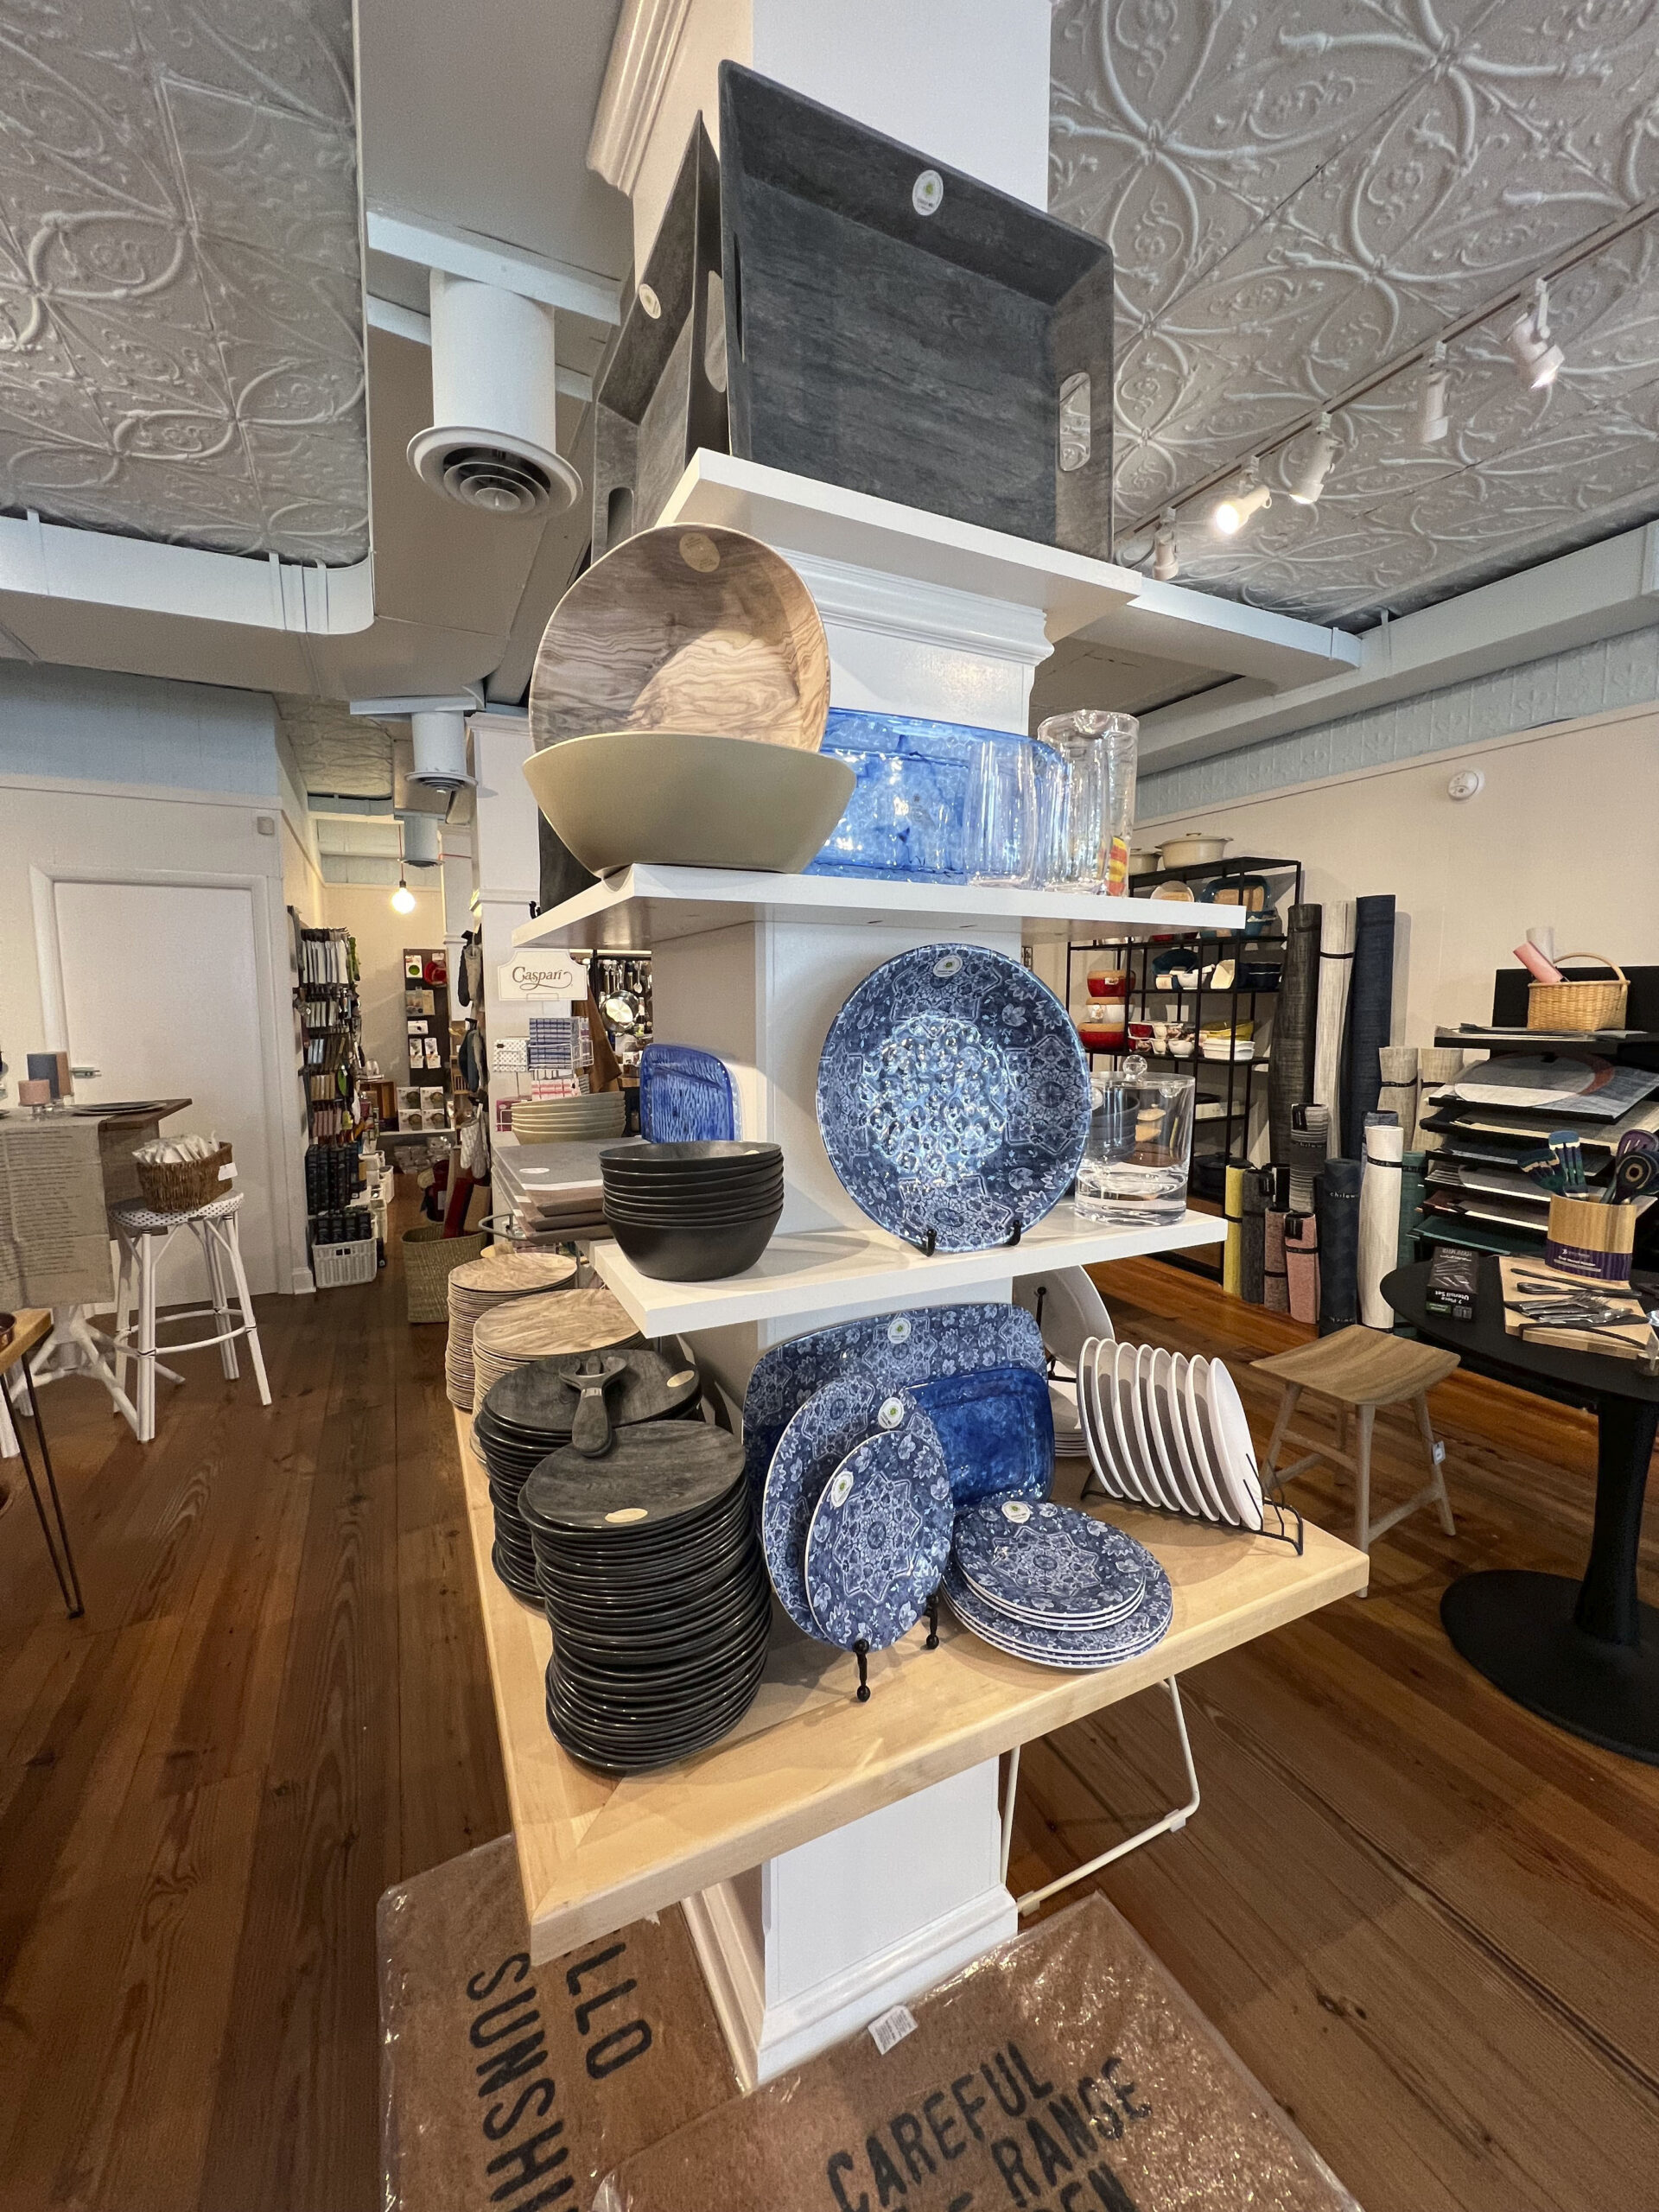 touchGOODS Offers One-Stop Shop For Home Furnishing Needs